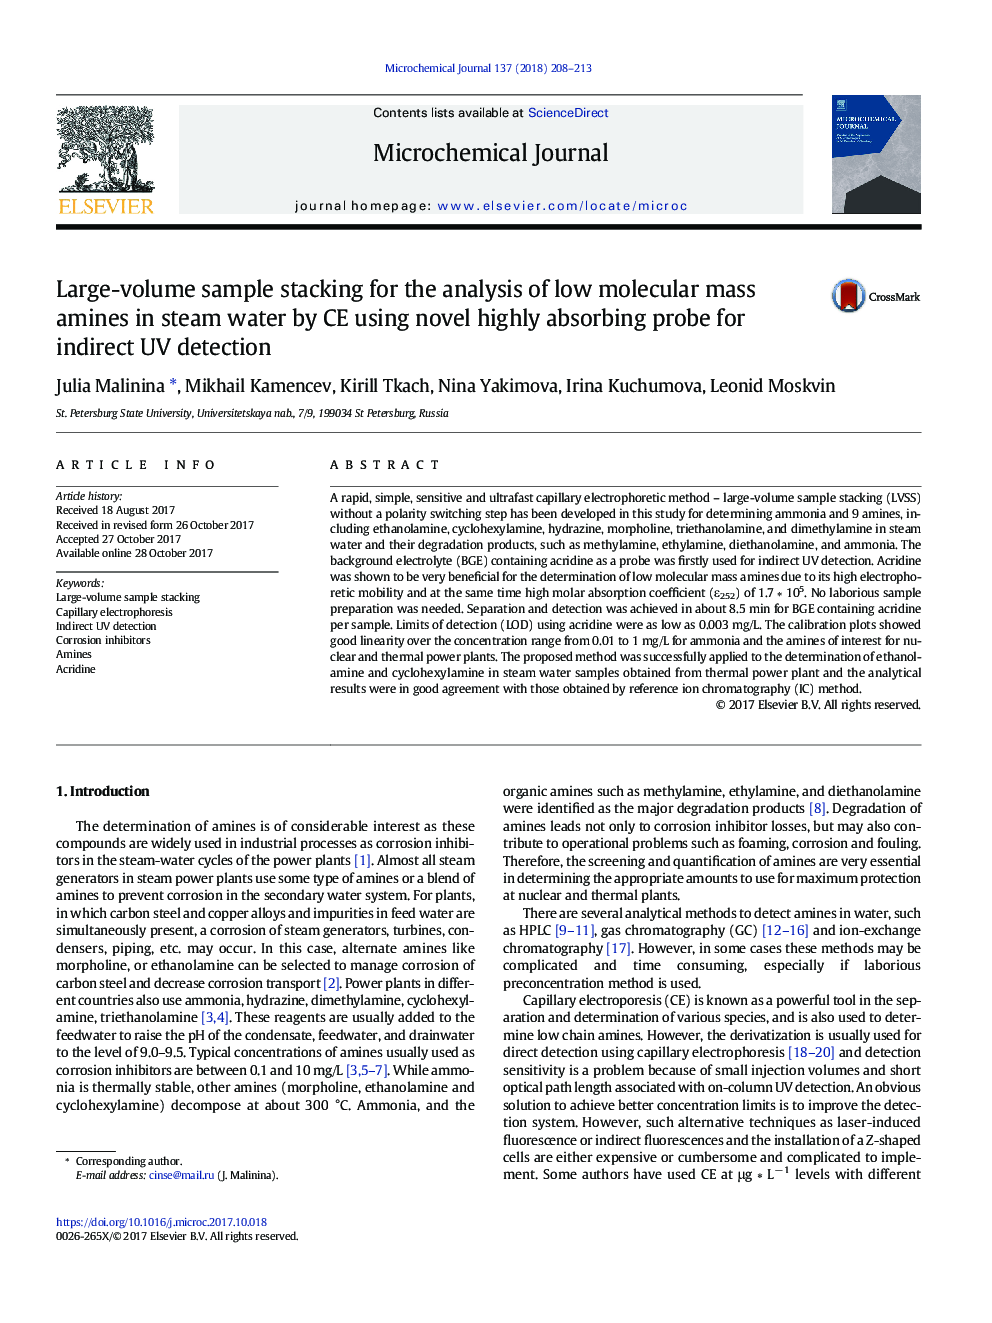 Large-volume sample stacking for the analysis of low molecular mass amines in steam water by CE using novel highly absorbing probe for indirect UV detection